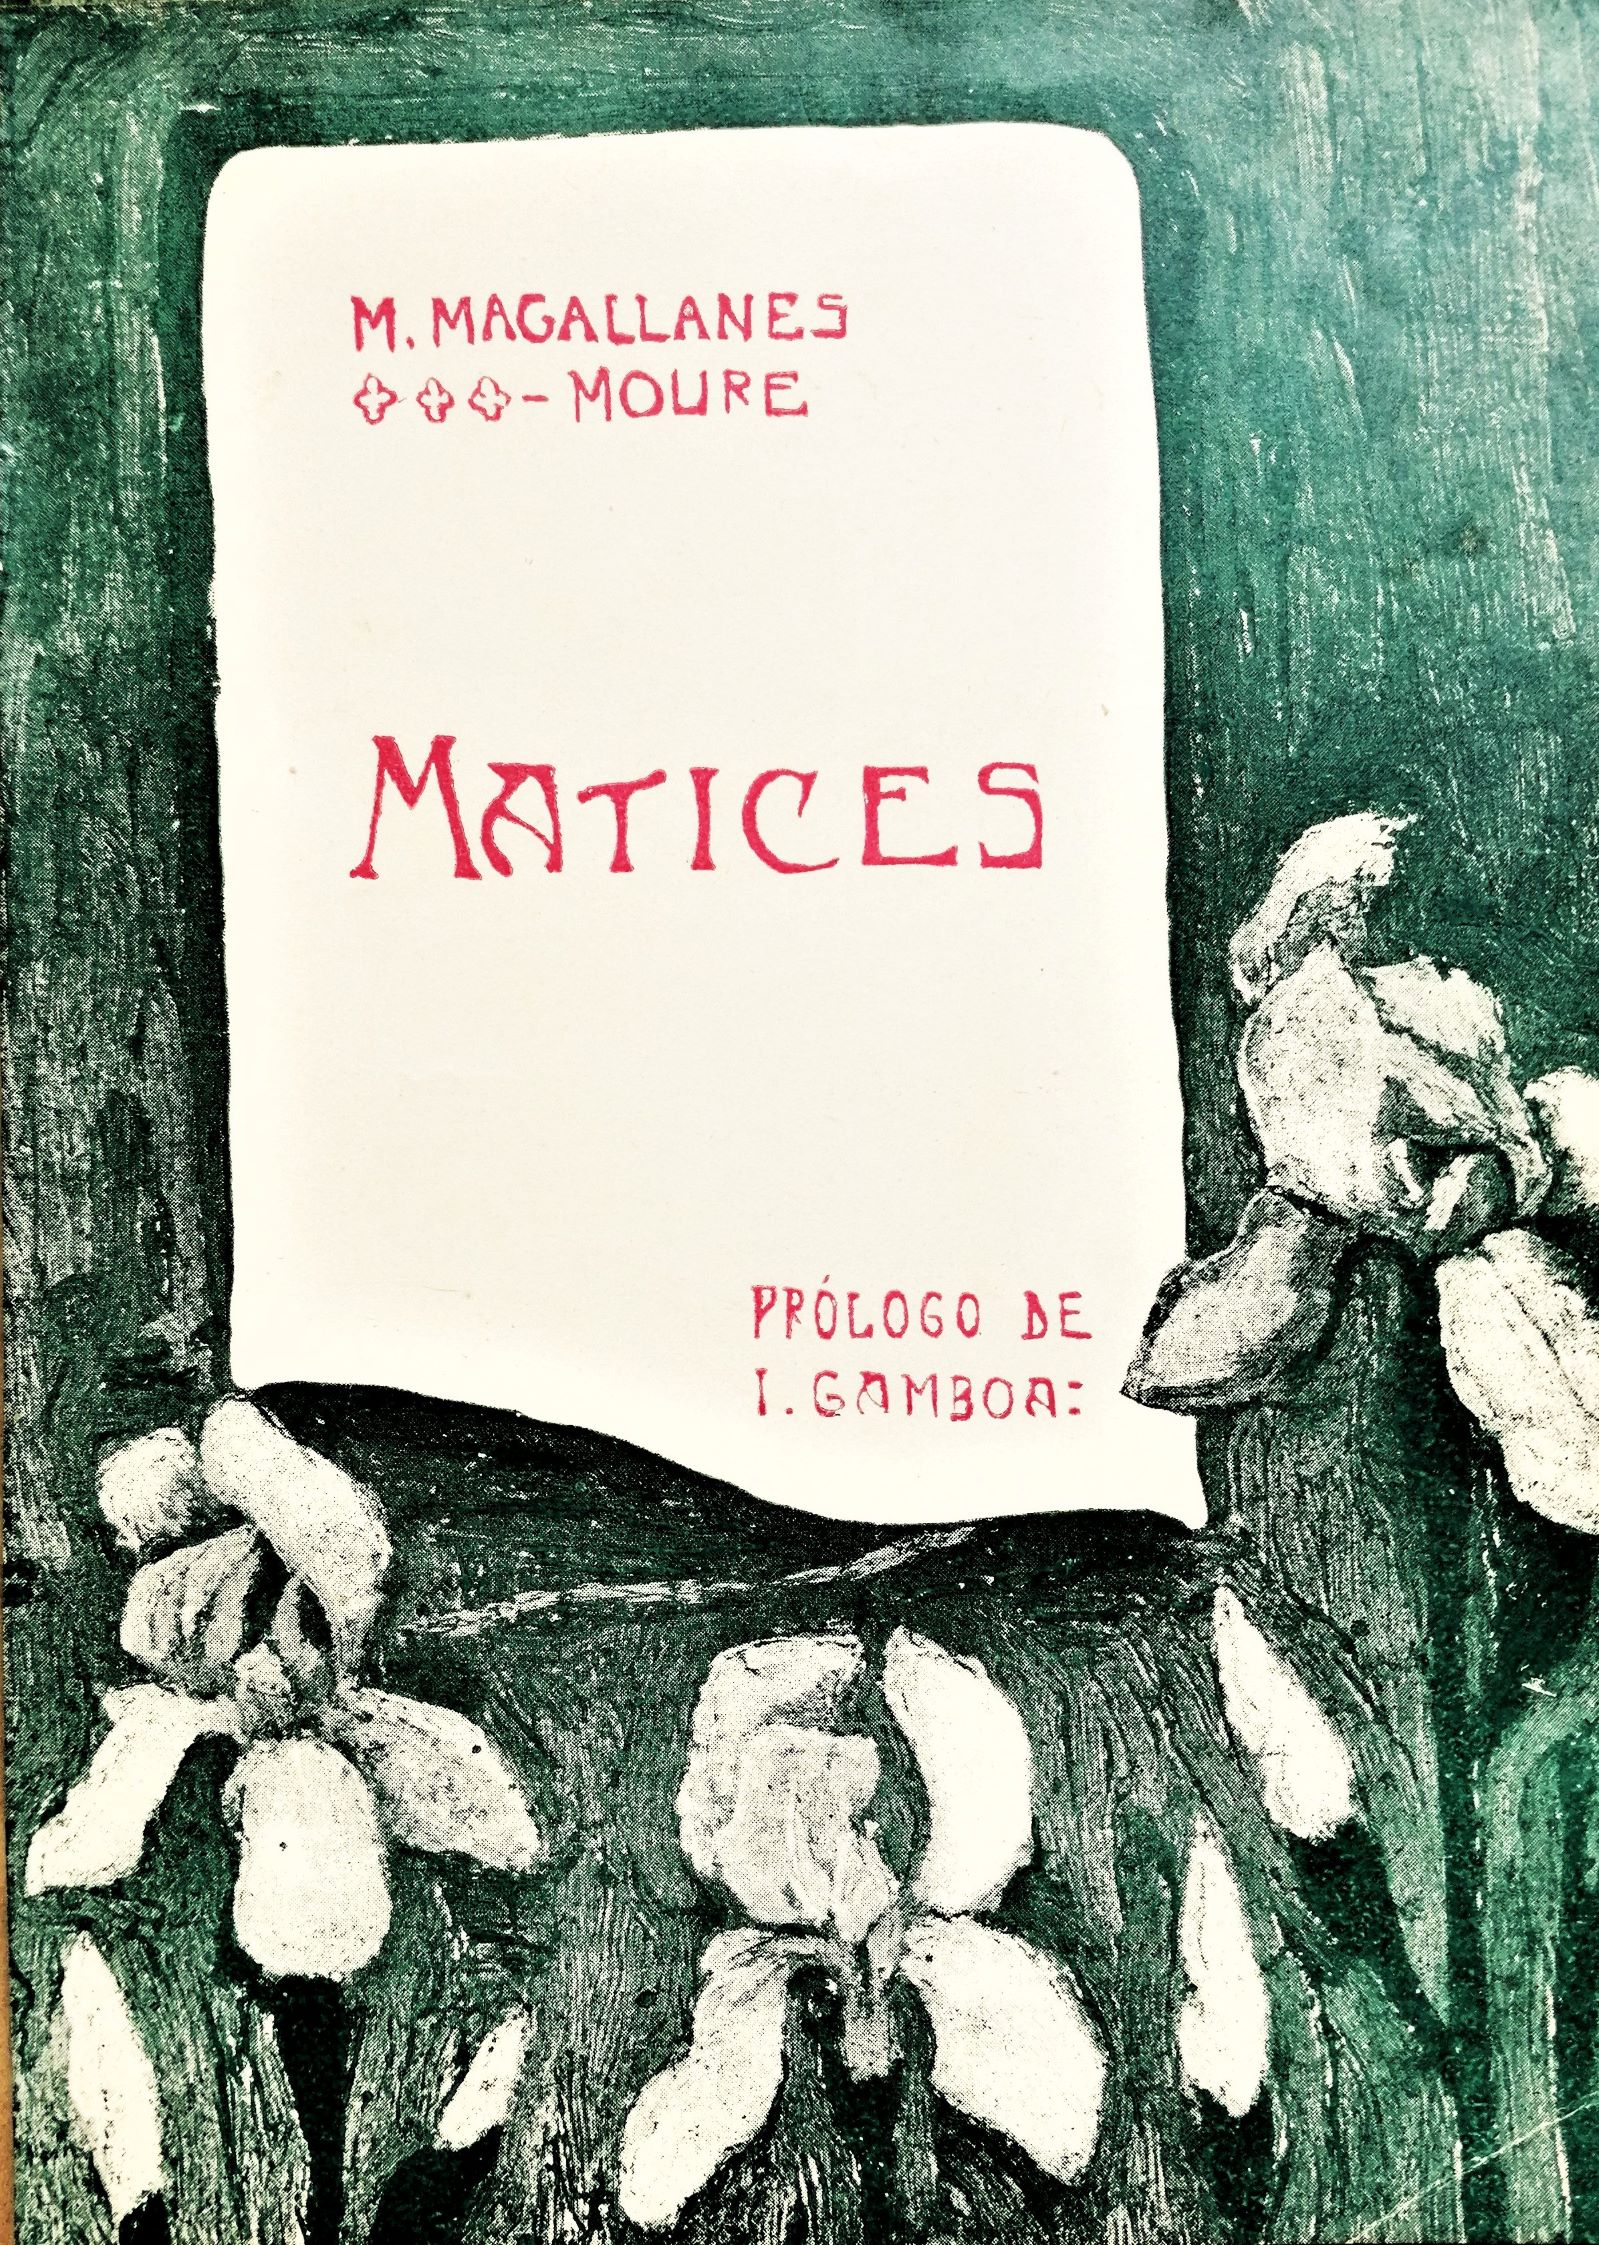 M. Magallanes Moure - Matices